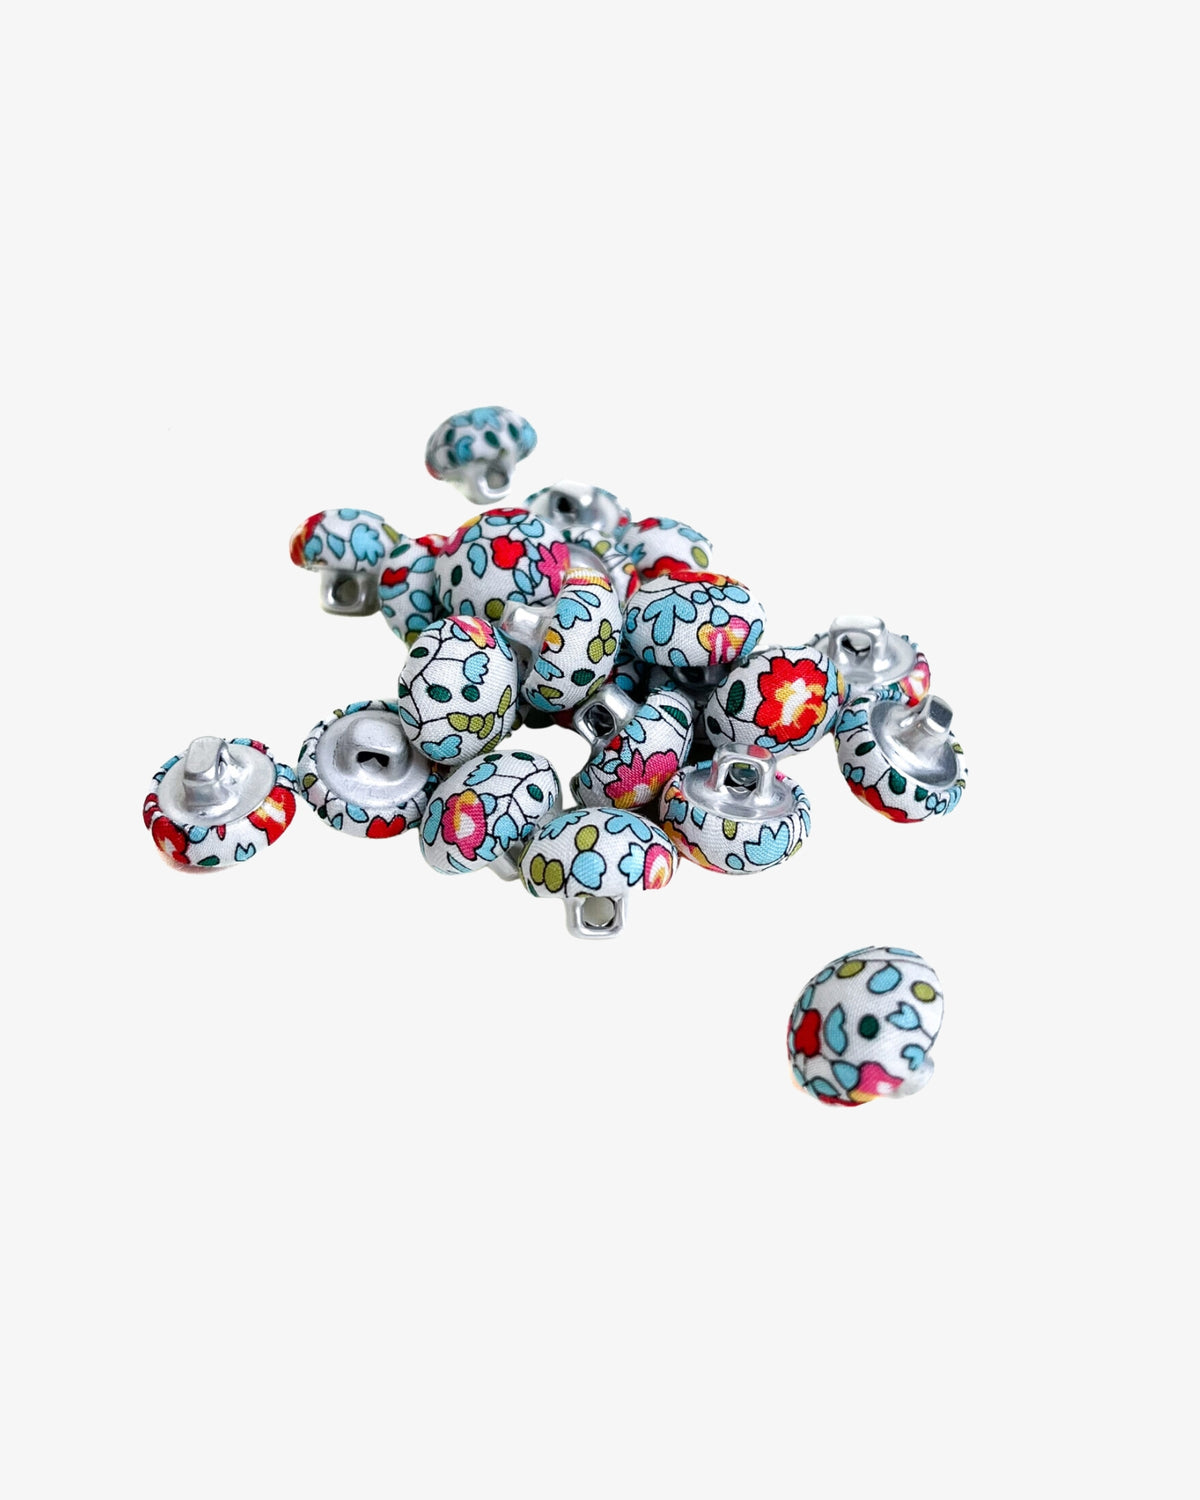 Liberty Print Covered Buttons by Christine Lipscomb